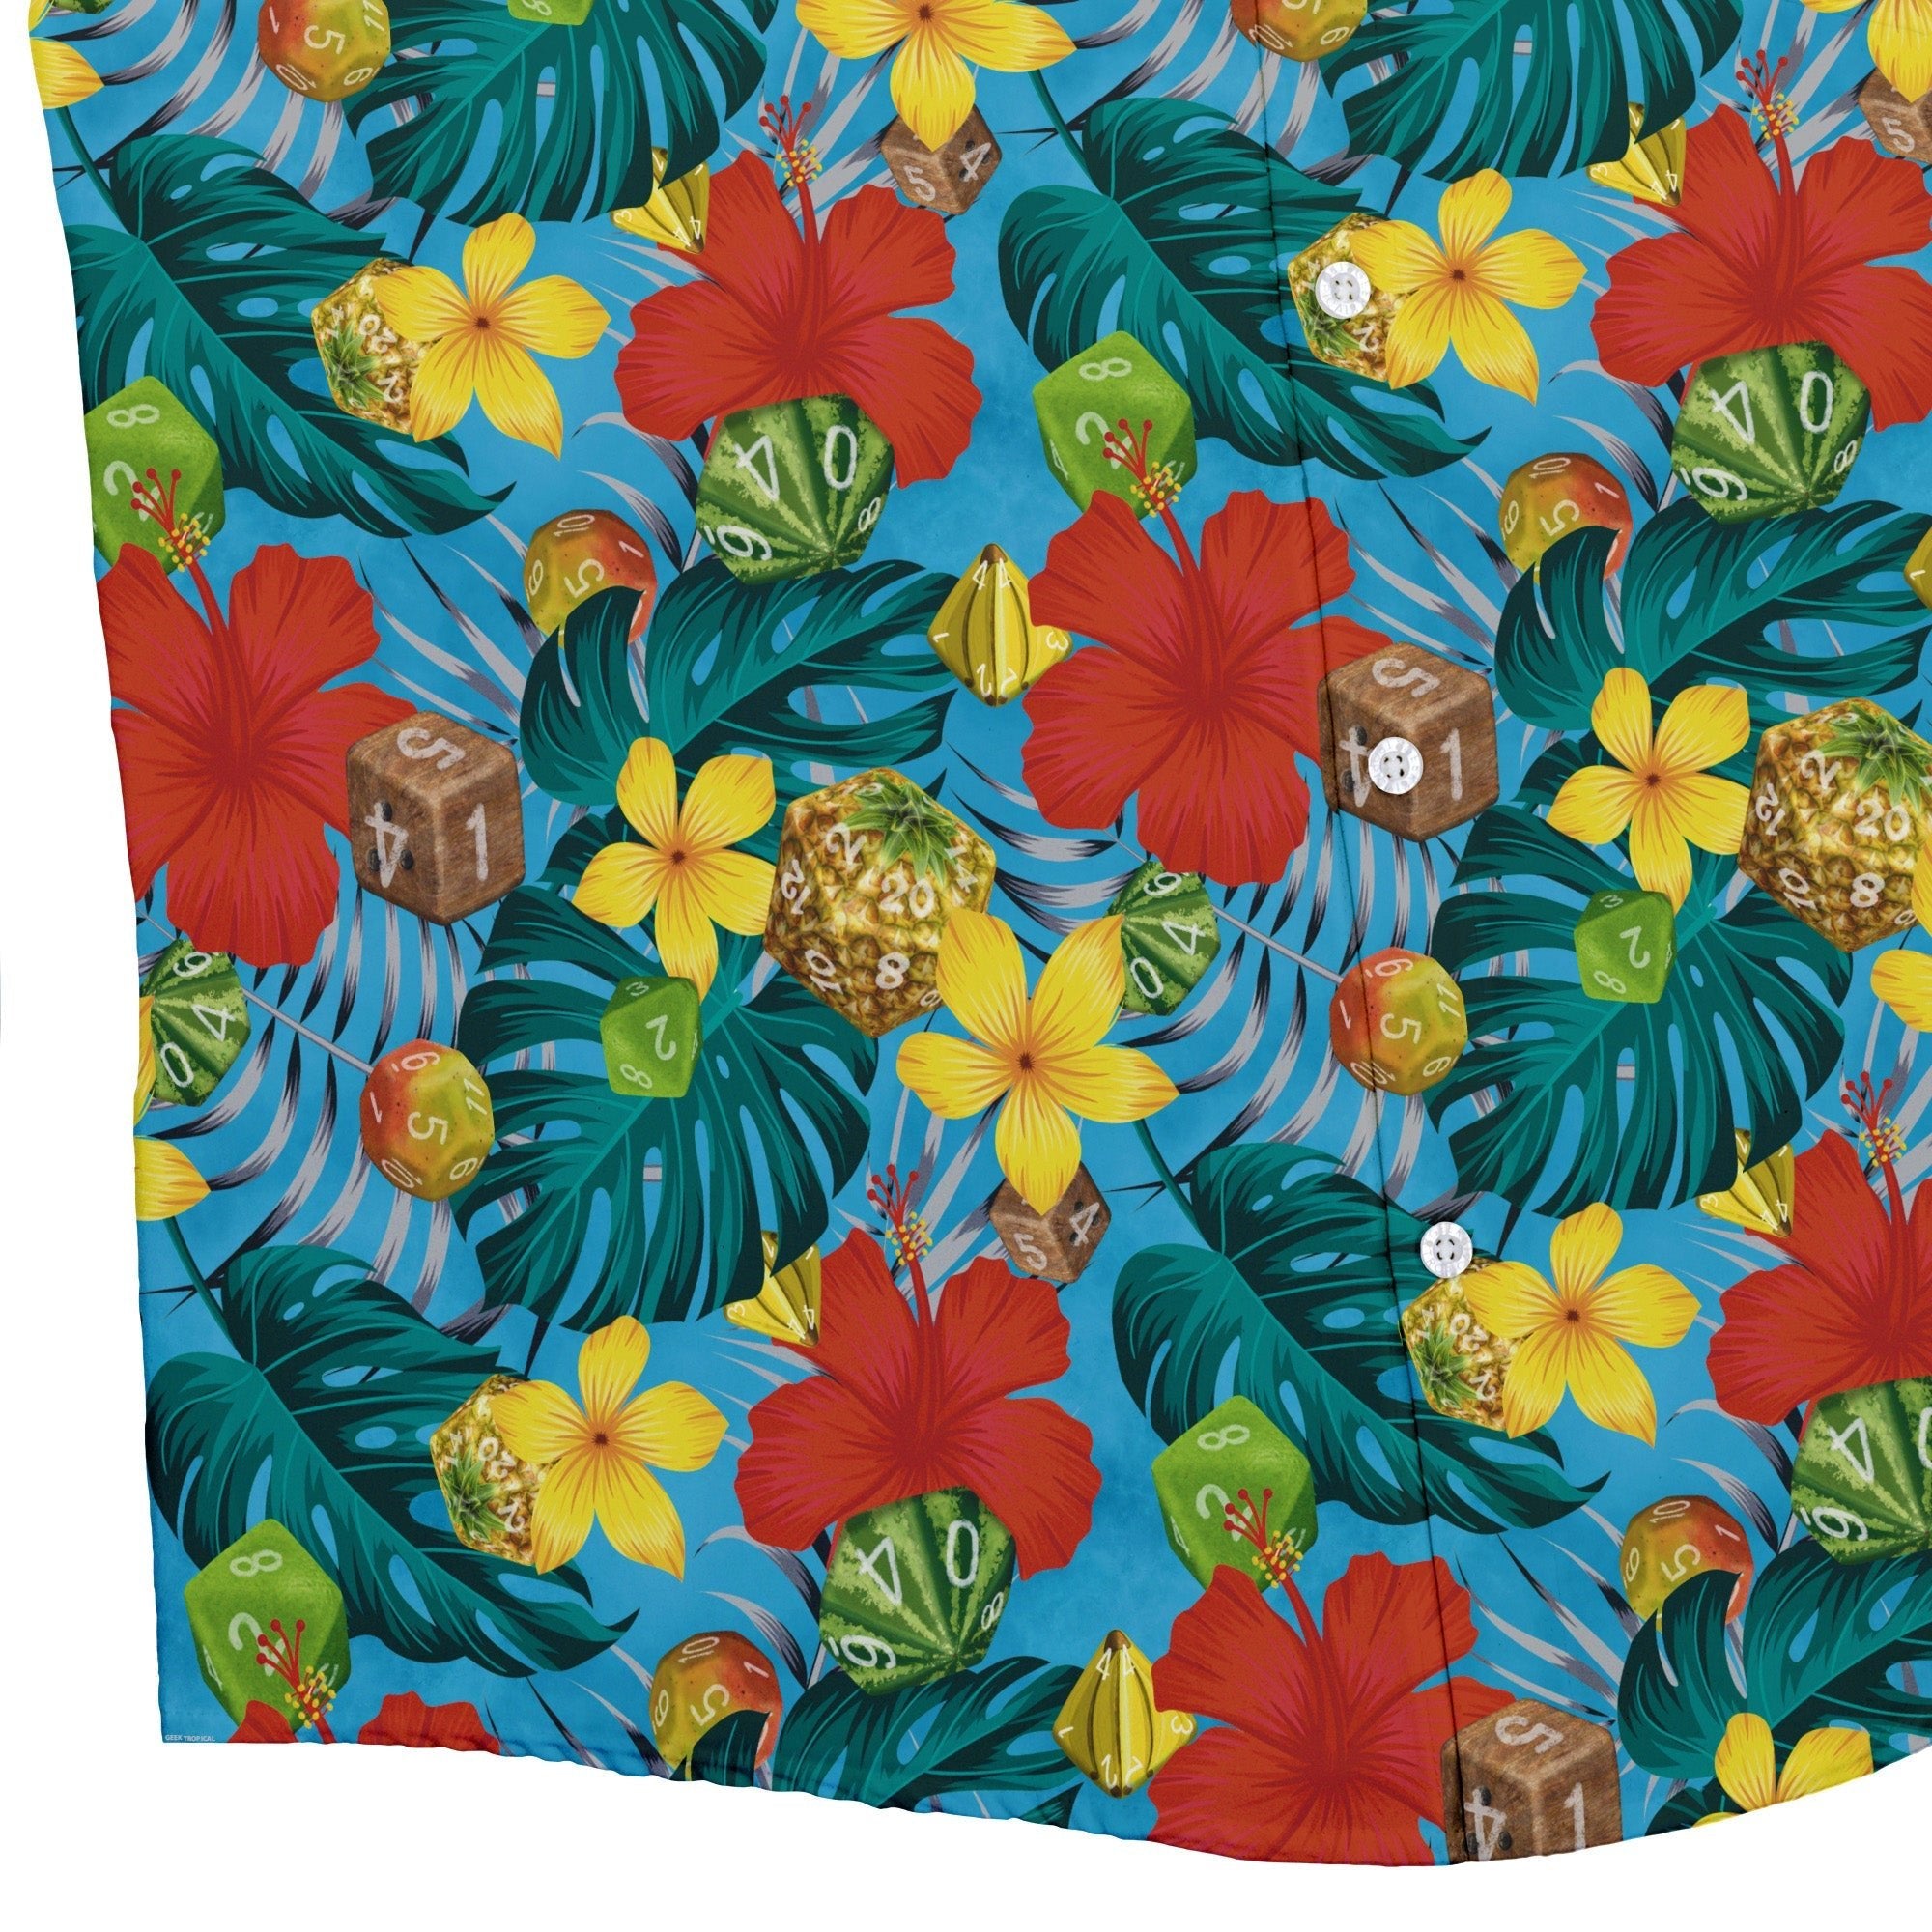 Tropical Fruit Dice Dnd Button Up Shirt - adult sizing - Designs by Nathan - dnd & rpg print